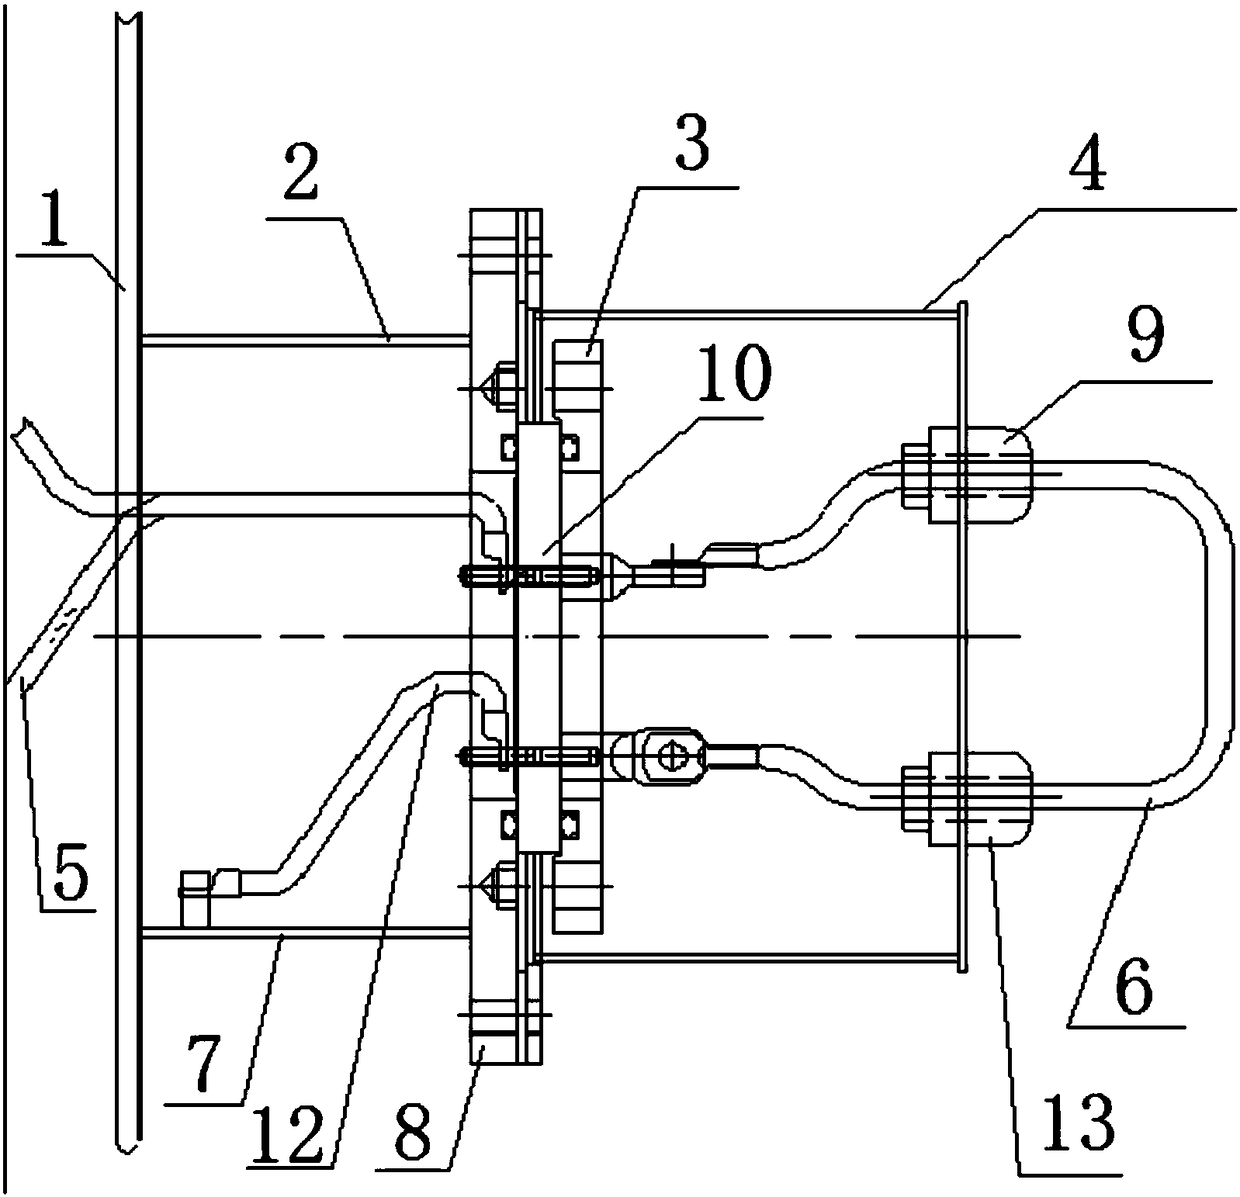 Transformer iron core grounding lead structure